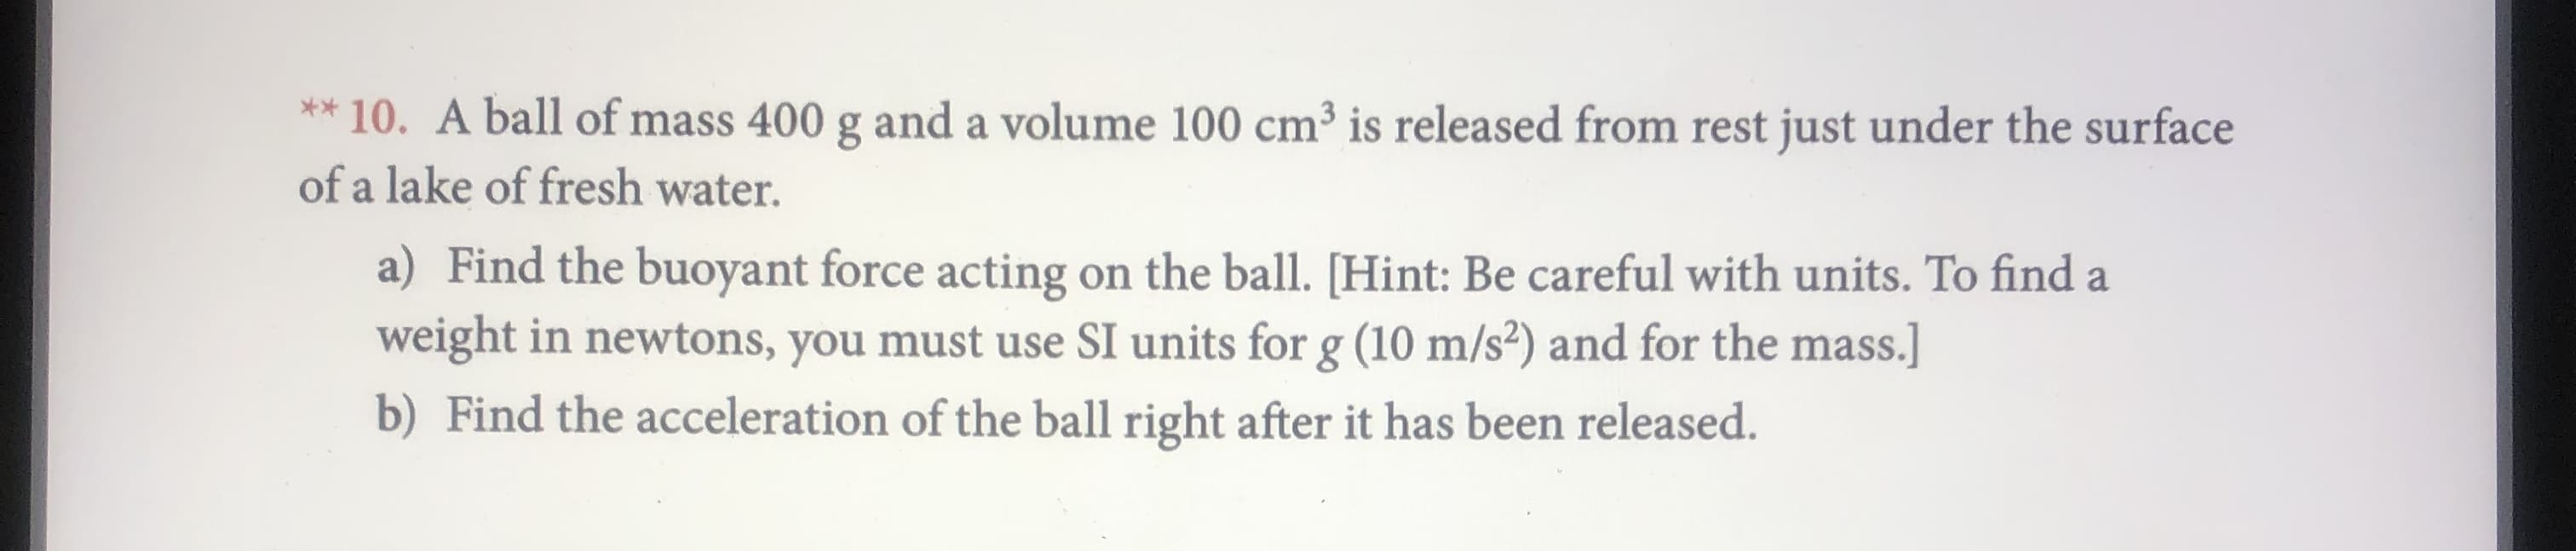 *10. A ball of mass 400 g anda volume 100 cm3 is released from rest just under the surface
of a lake of fresh water.
a) Find the buoyant force acting on the ball. [Hint: Be careful with units. To find a
weight in newtons, you must use SI units for g (10 m/s2) and for the mass.]
b) Find the acceleration of the ball right after it has been released.
